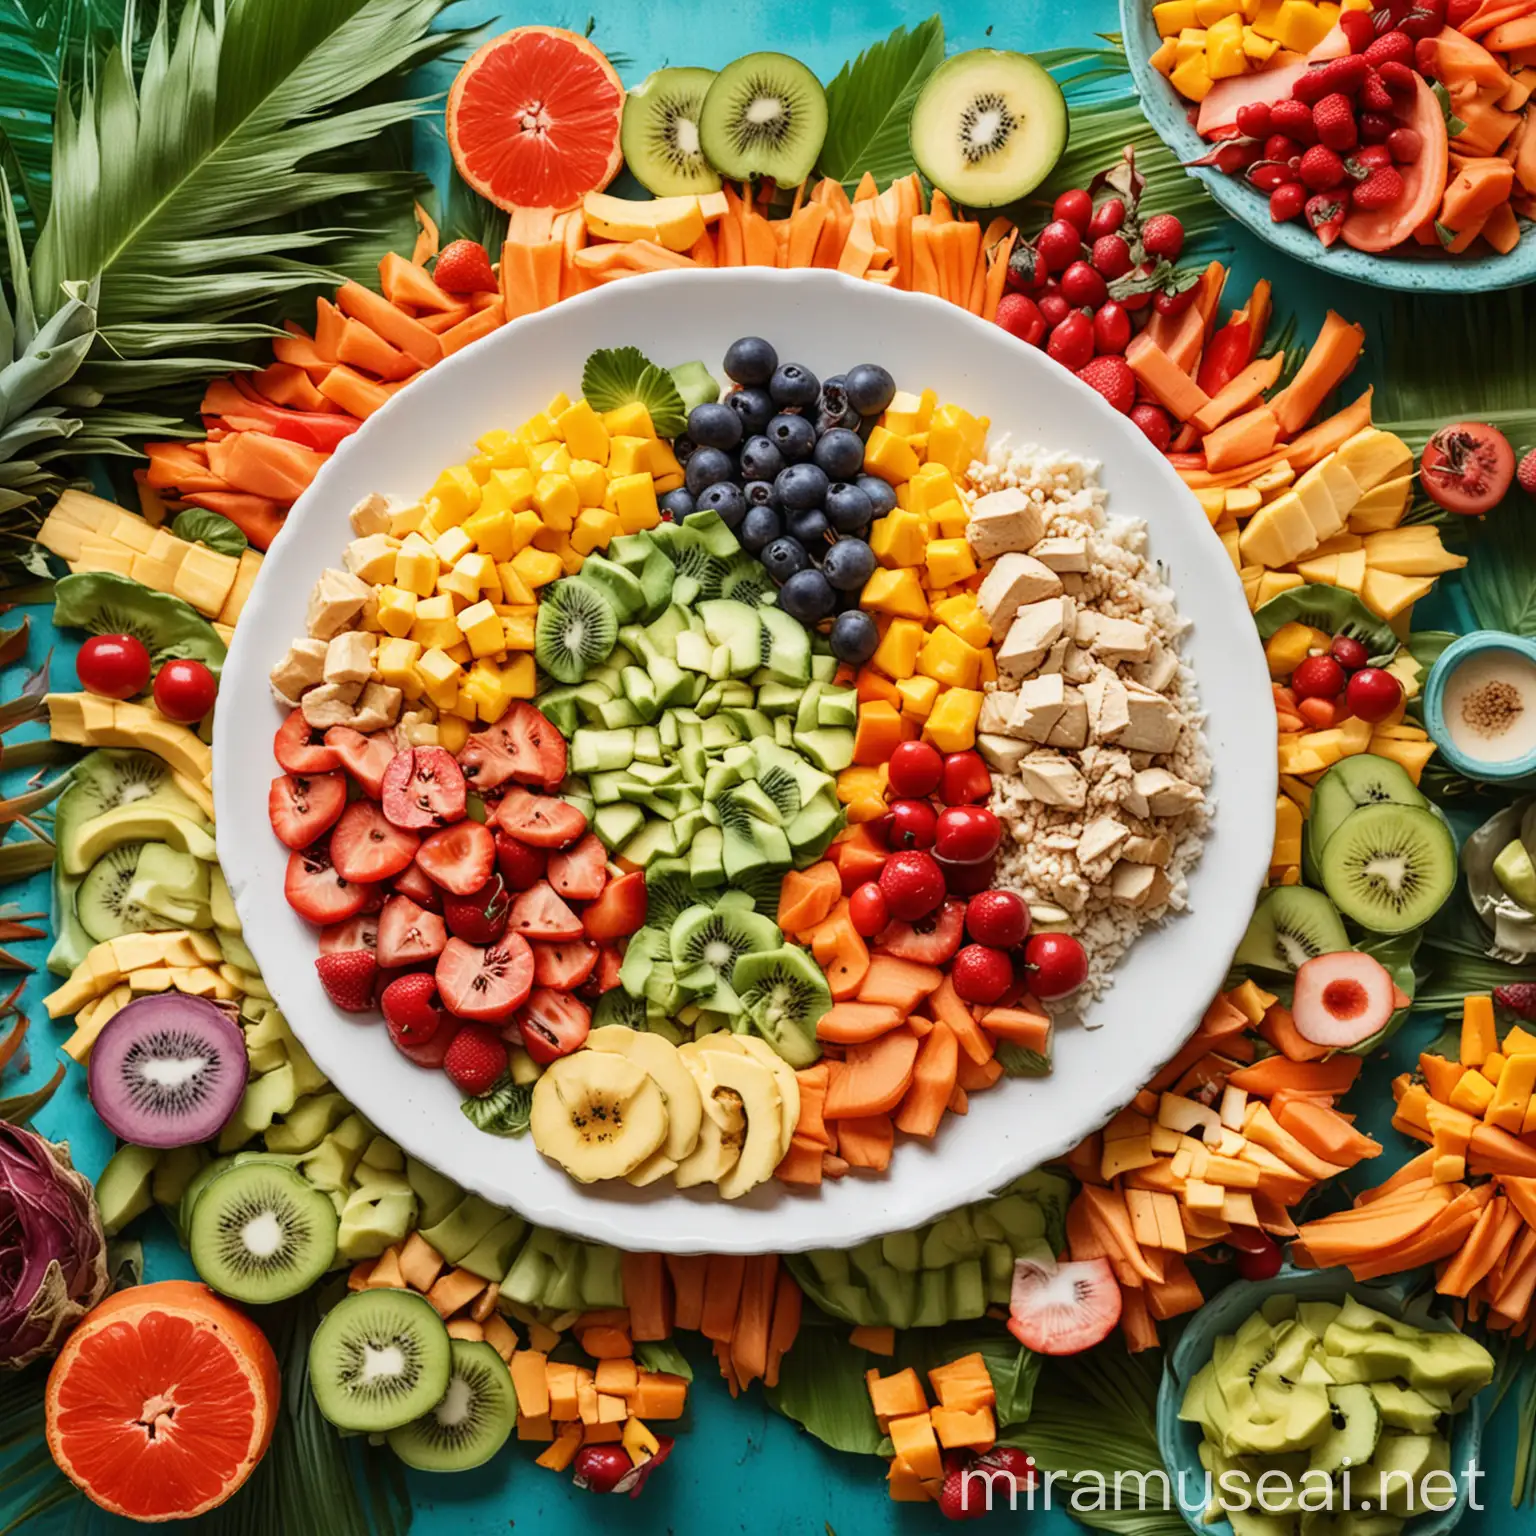 A vibrant plate of colorful, healthy food with a tropical background.